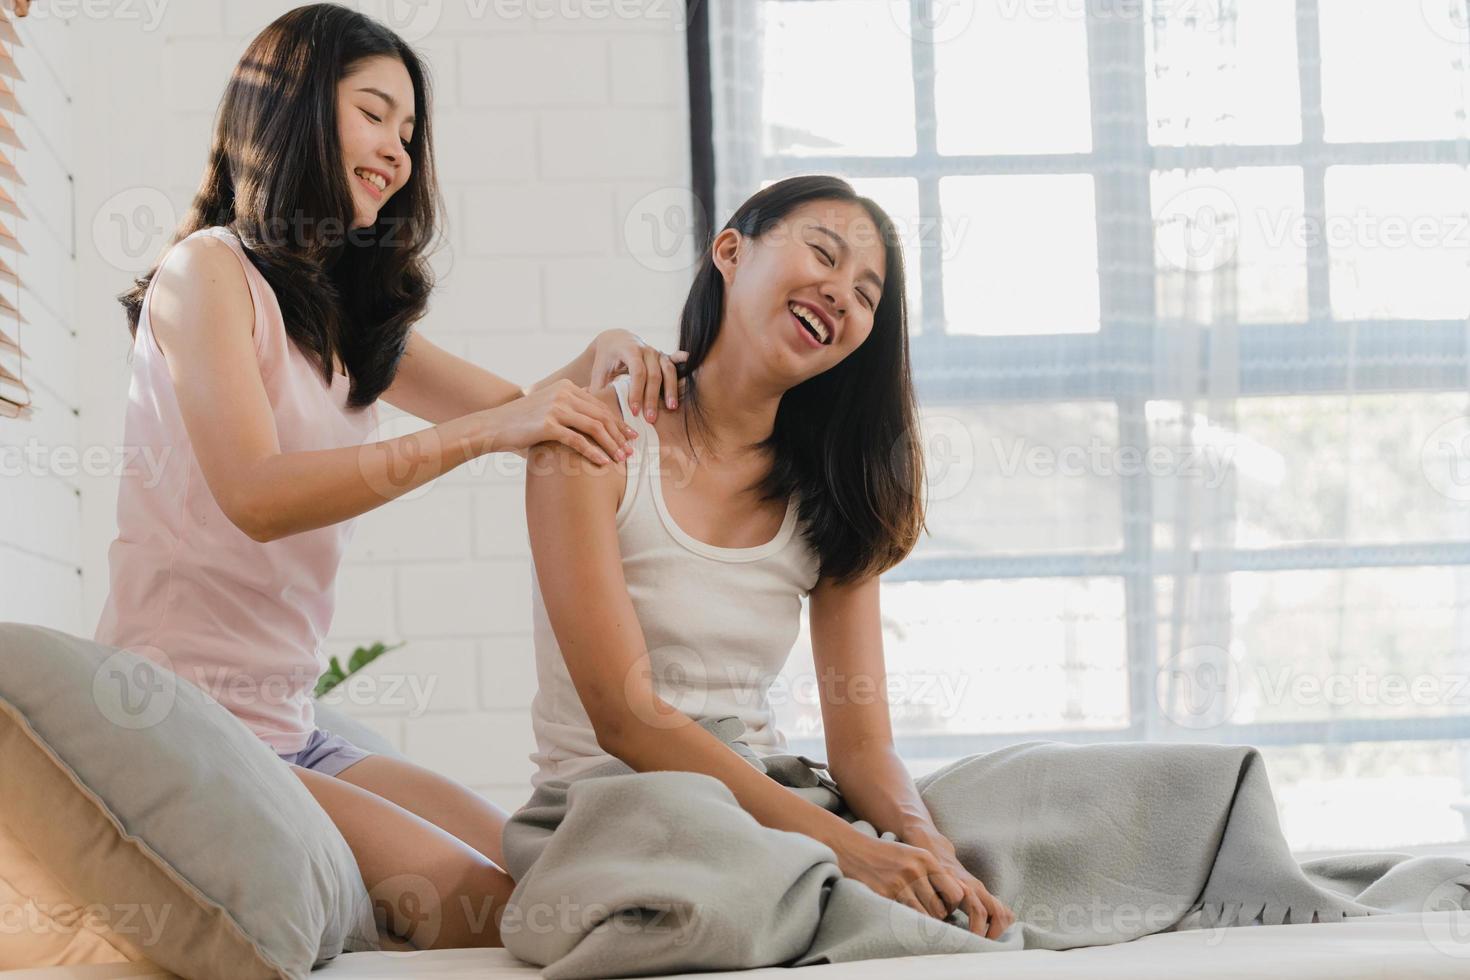 amplifikation skjold Afvist Asian Lesbian lgbtq women couple massage each other at home. Young Asia  lover female happy relax rest together after wake up, body wellness in  bedroom at home in the morning concept. 5494481